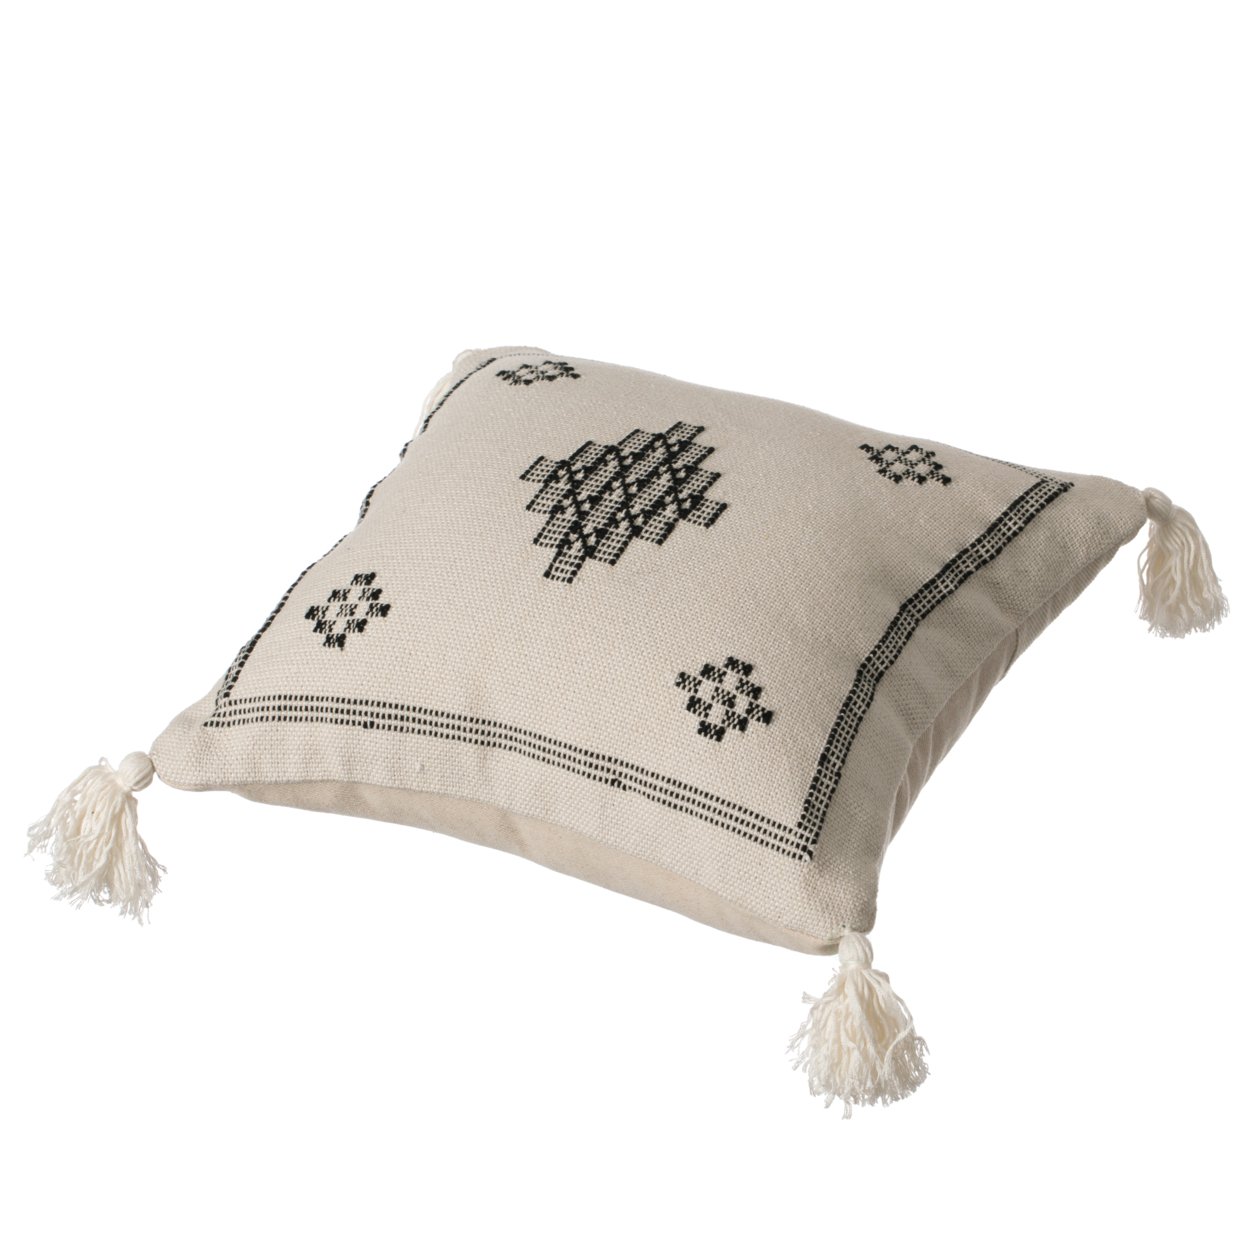 16 Throw Pillow Cover With Southwest Tribal Pattern And Corner Tassels - Grey